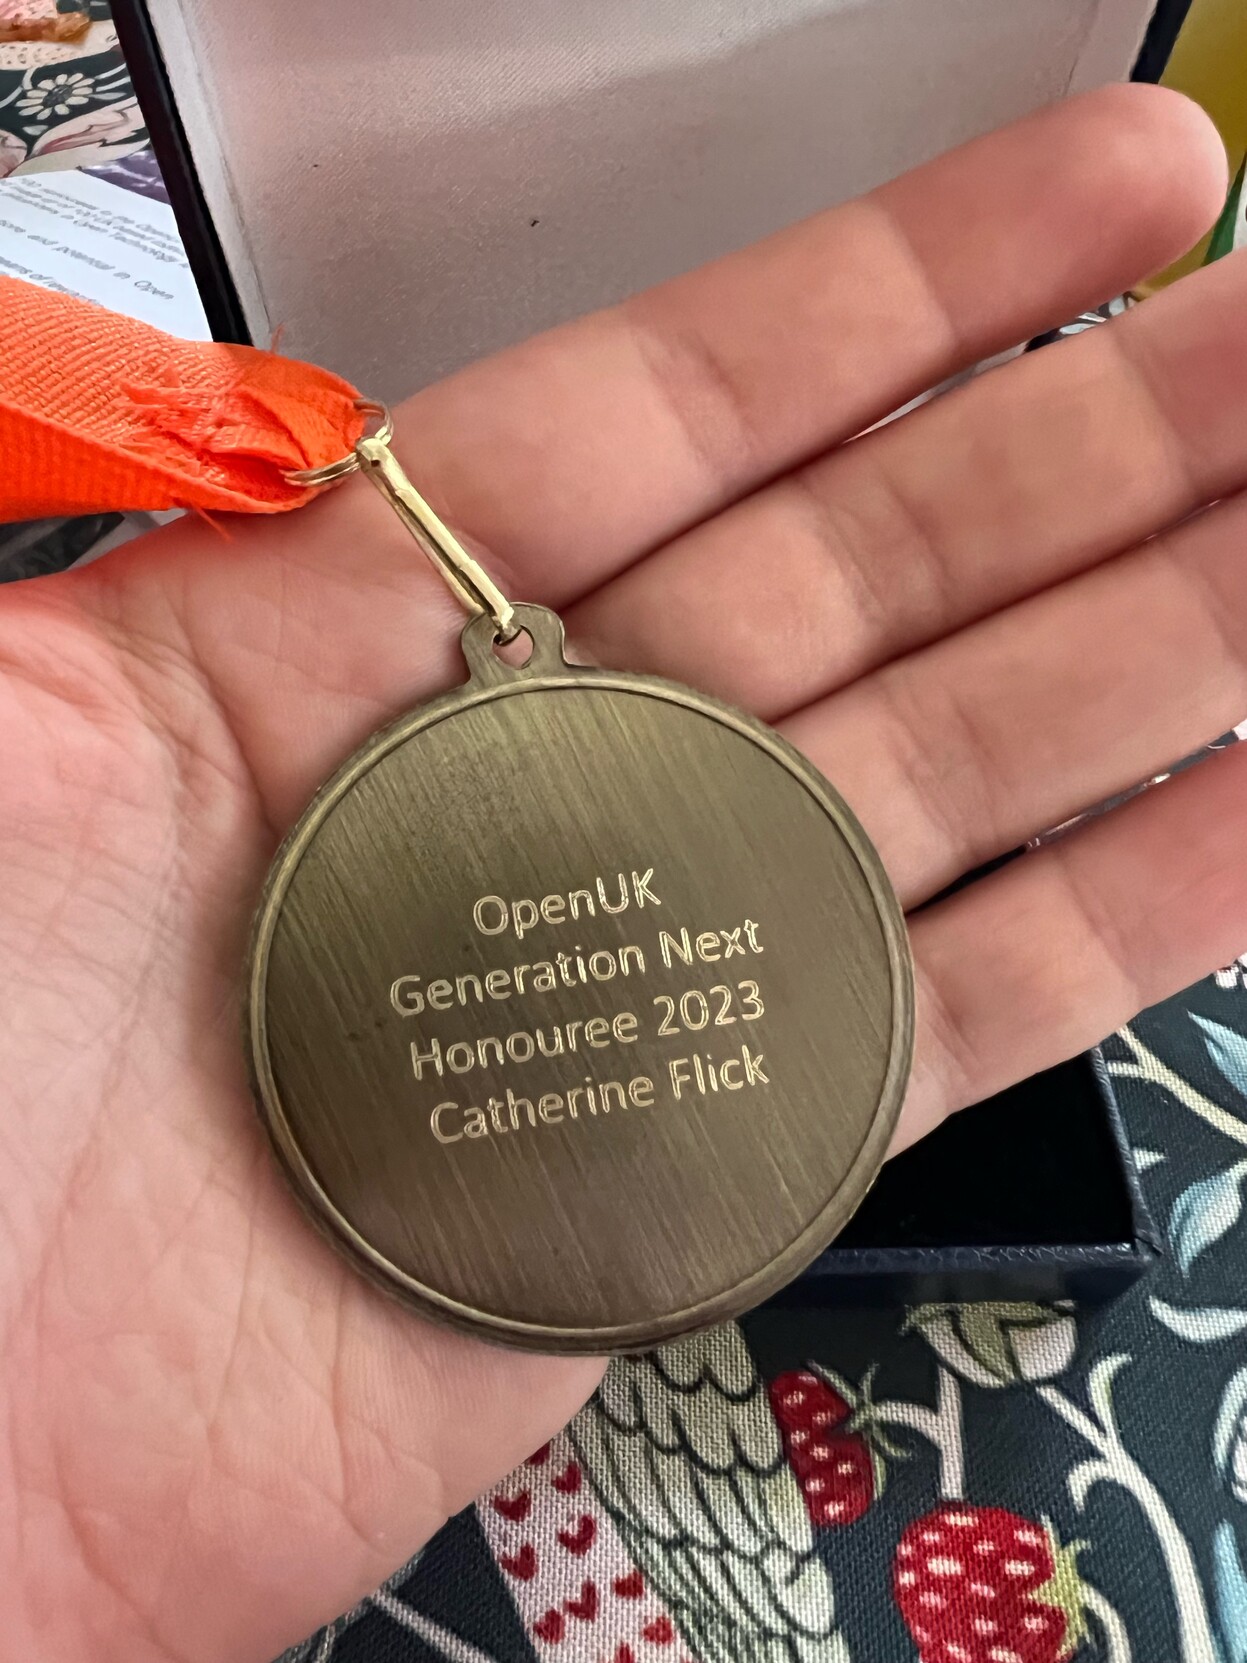 An image of a medal engraved with: OpenUK Generation Next Honouree 2023 Catherine Flick